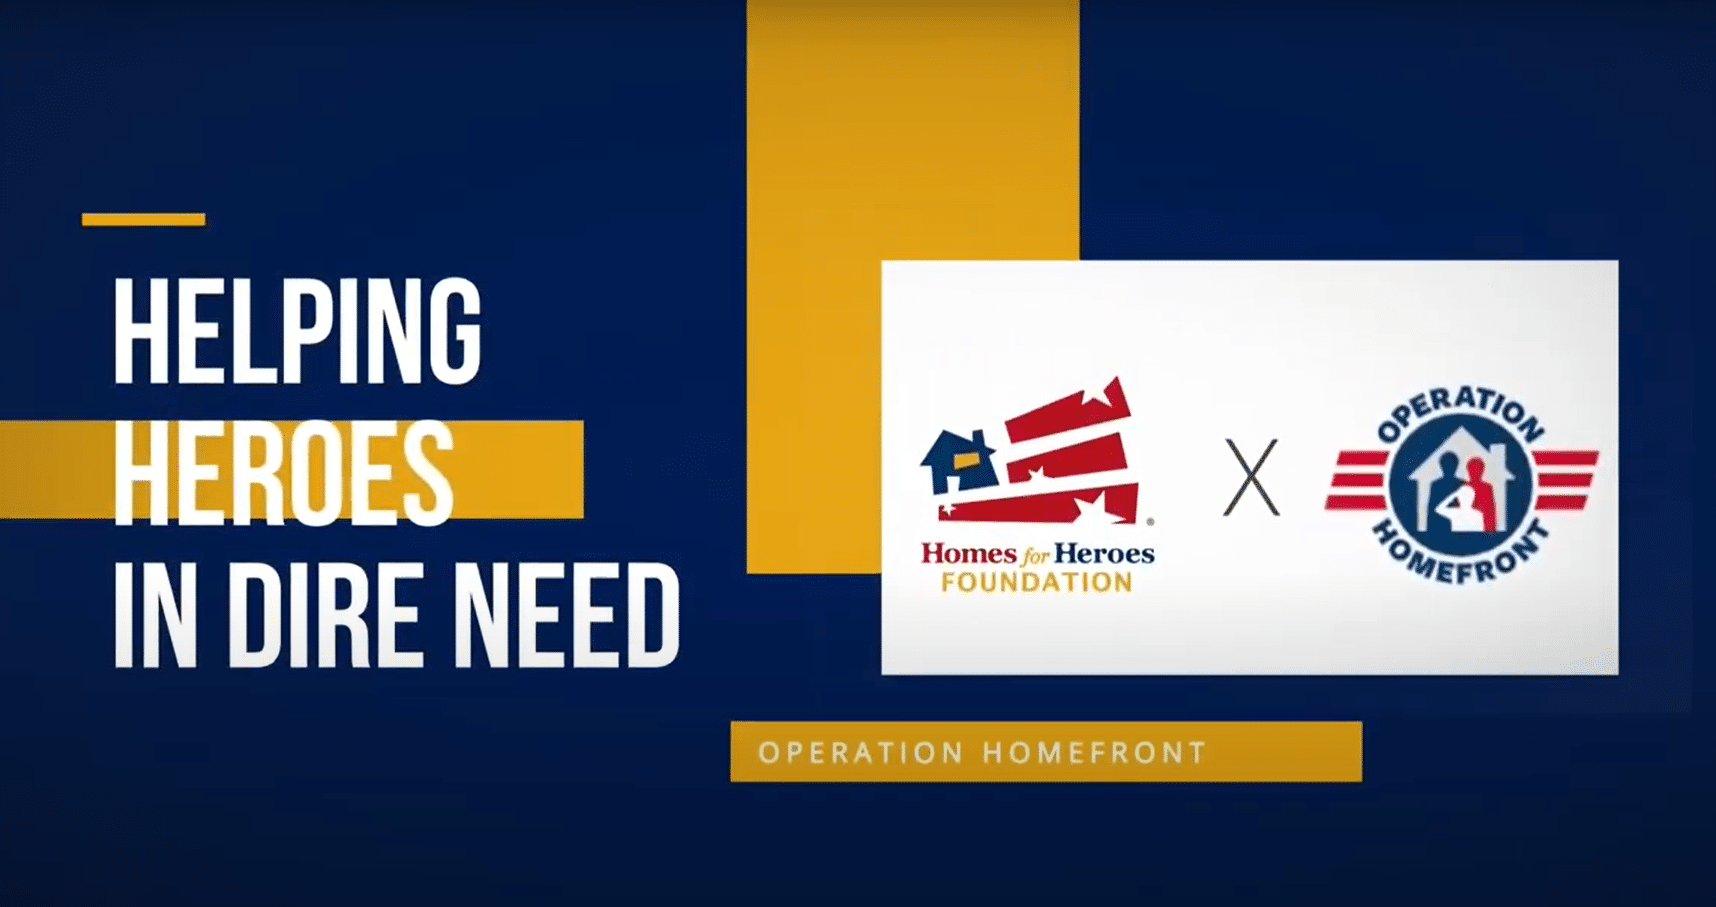 Operation Homefront Grant From Homes for Heroes Foundation